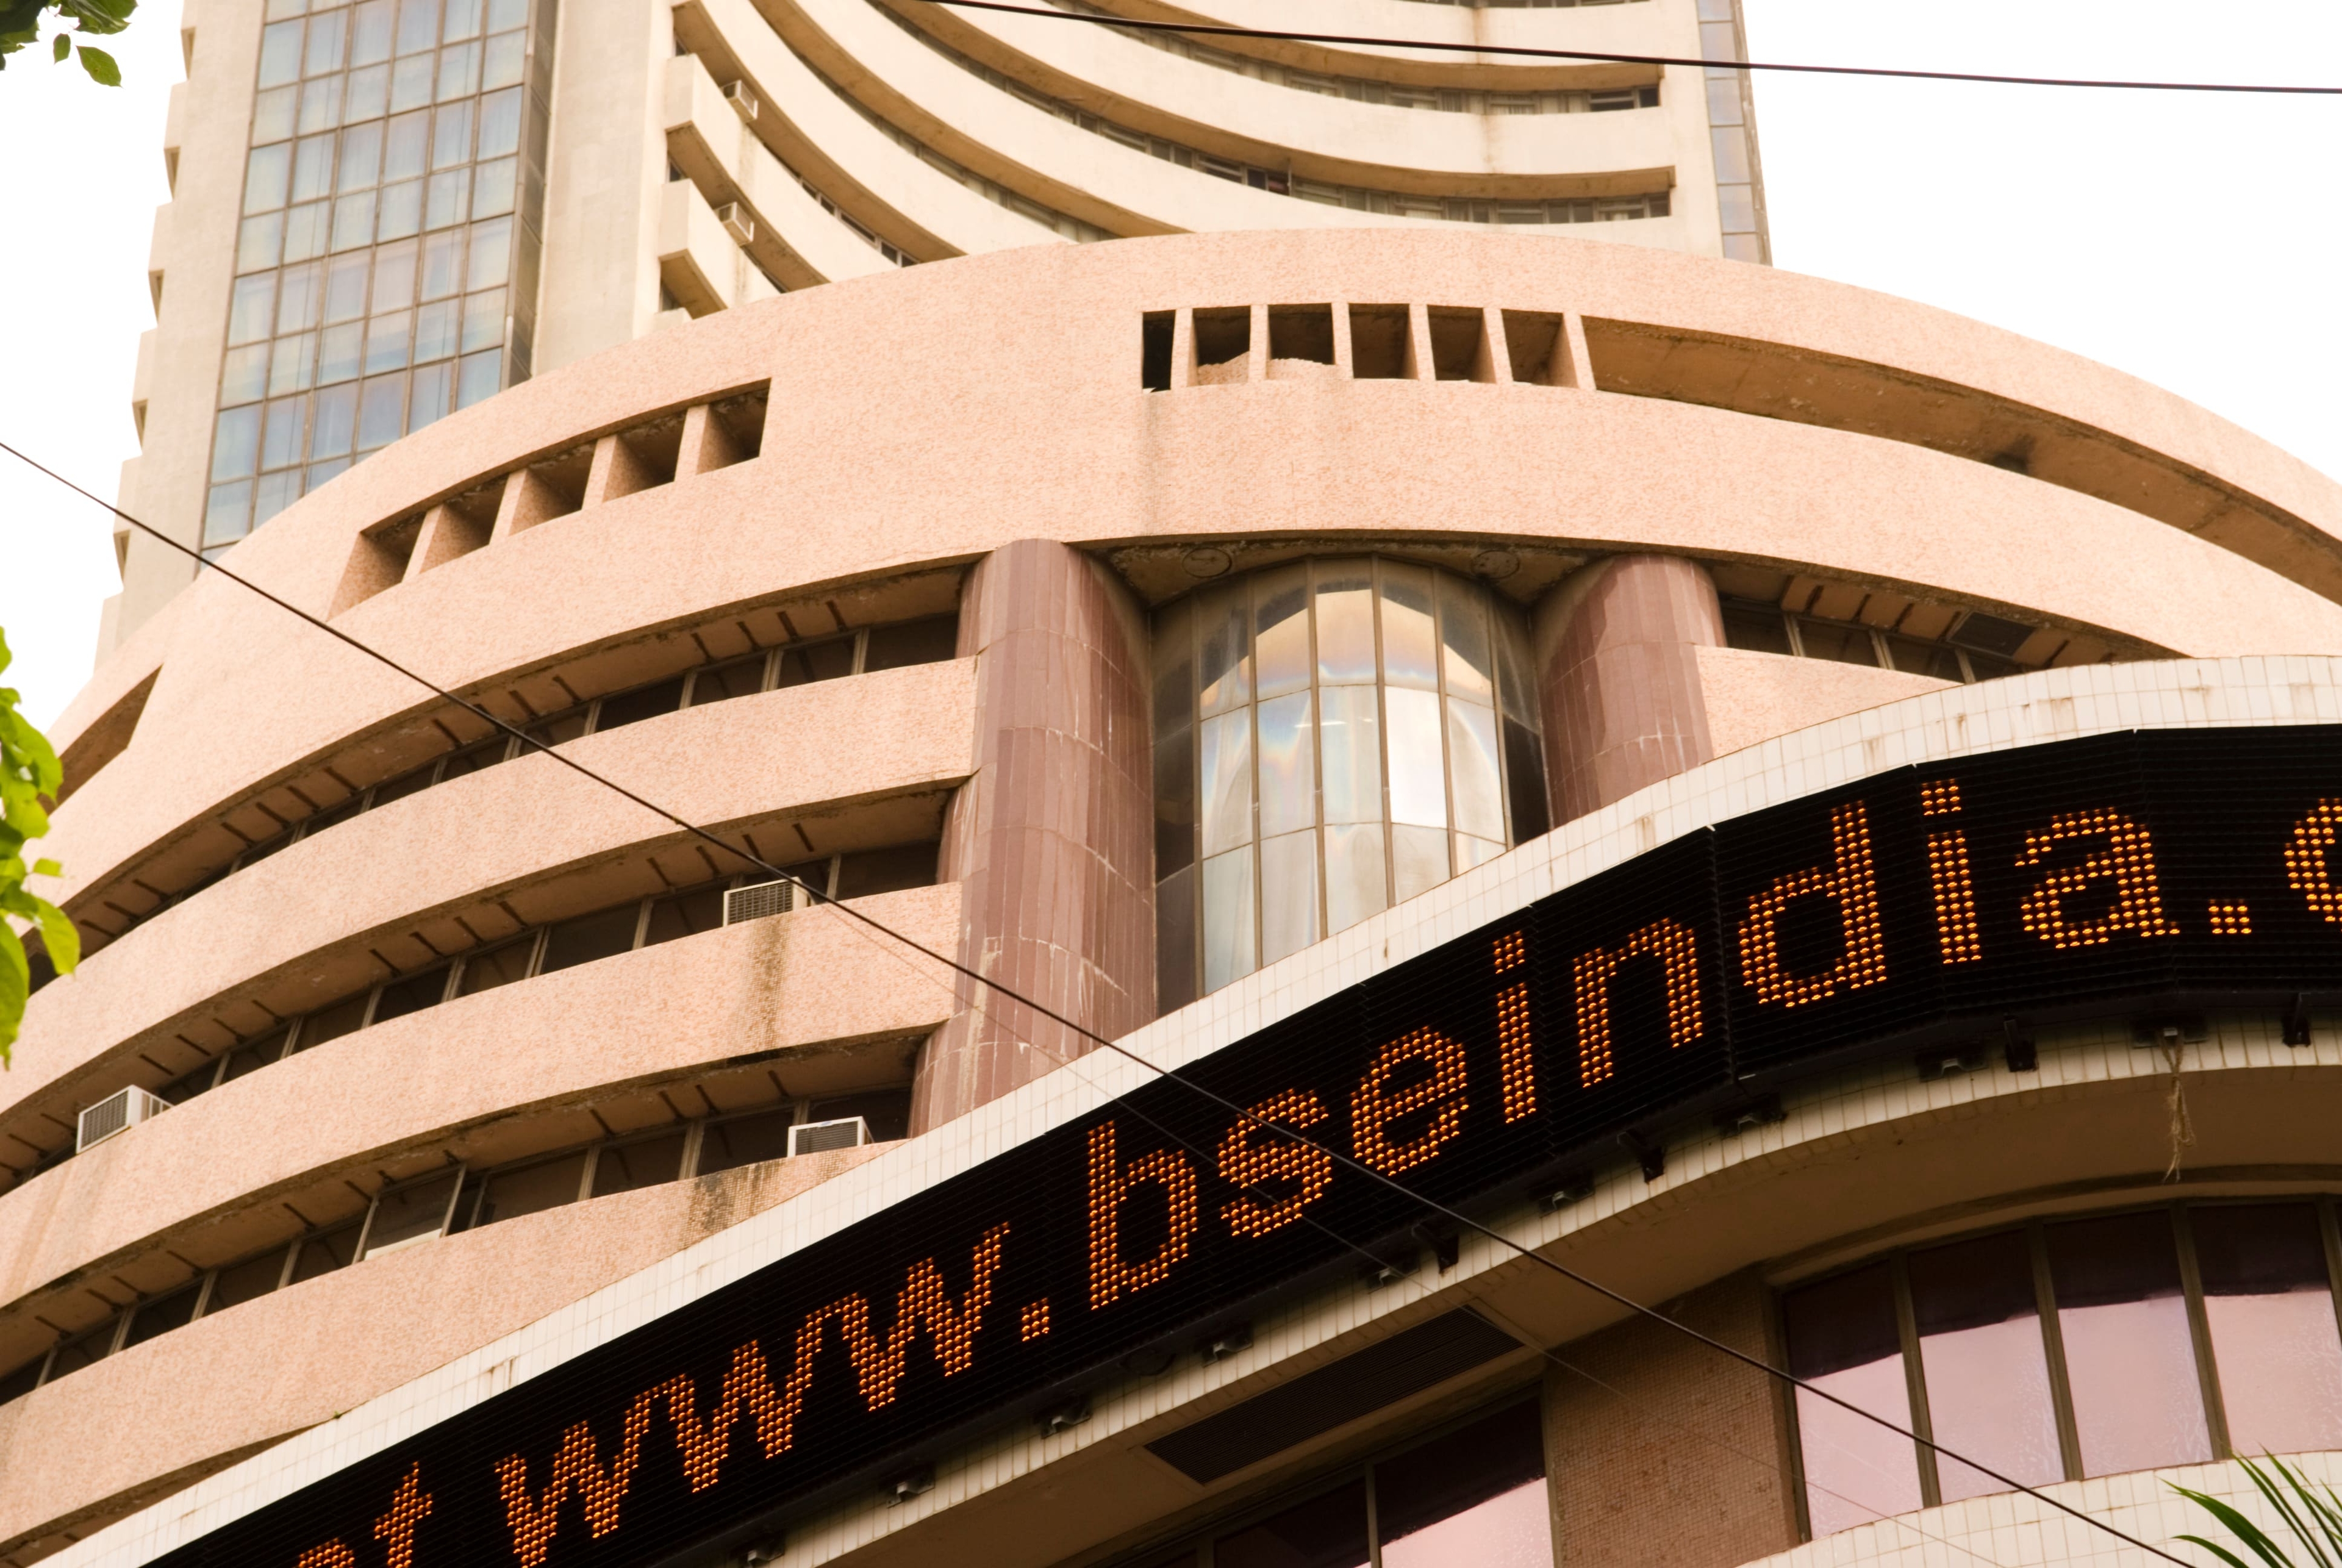 The domestic market resumed its upward march on March 22 amid mixed global cues even as the Ukraine war continued without any signs of an end. The 30-share pack Sensex closed 697 points, or 1.22 percent, higher at 57,989.30 while the Nifty50 ended at 17,315.50, up 198 points, or 1.16 percent.